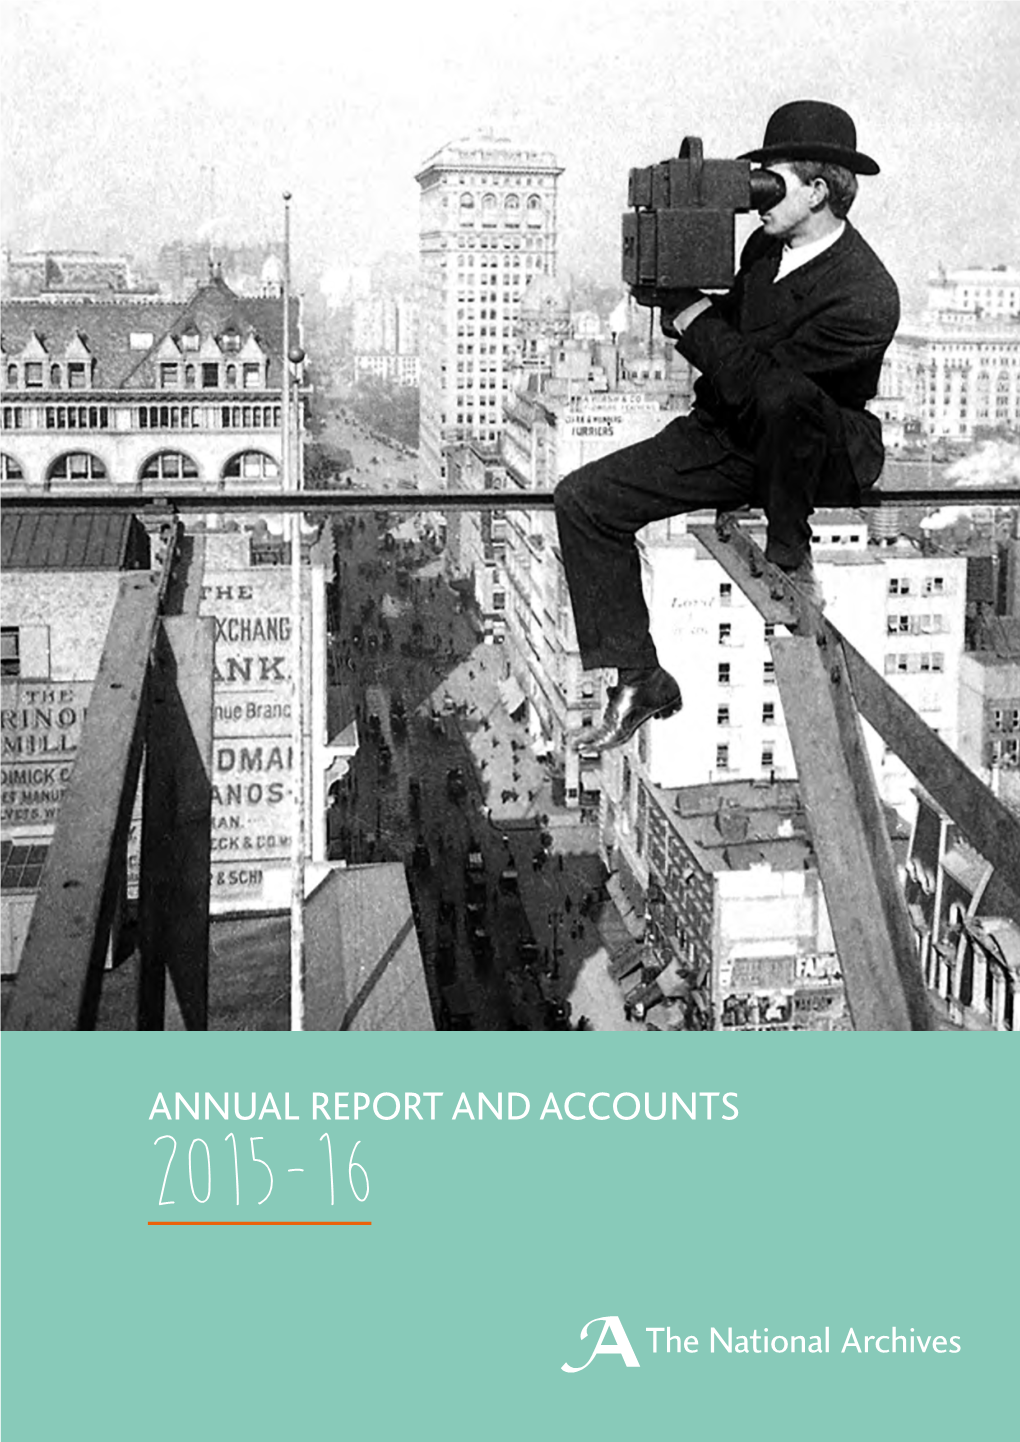 Annual Report and Accounts 2015-16